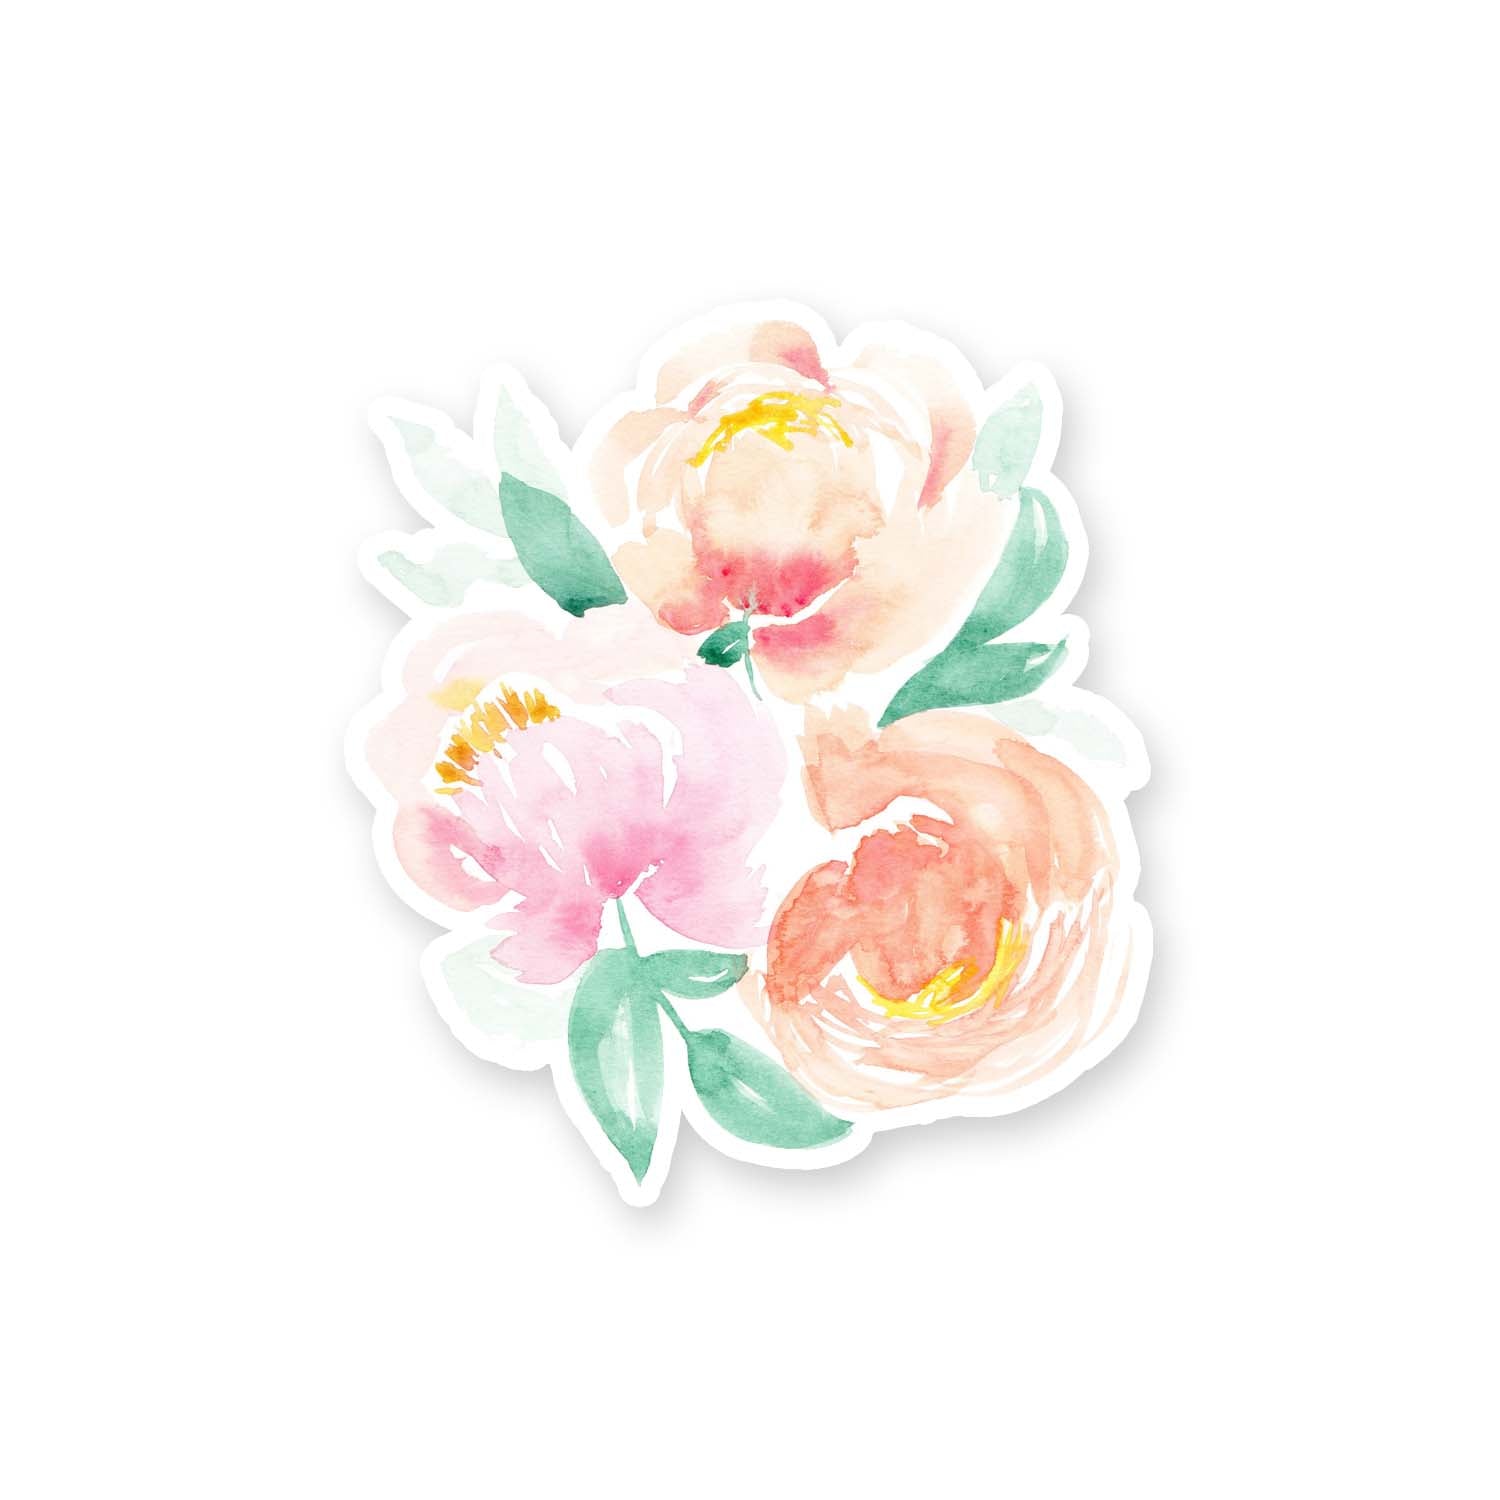 3" vinyl sticker of 3 pink and peach watercolor peonies and leaves